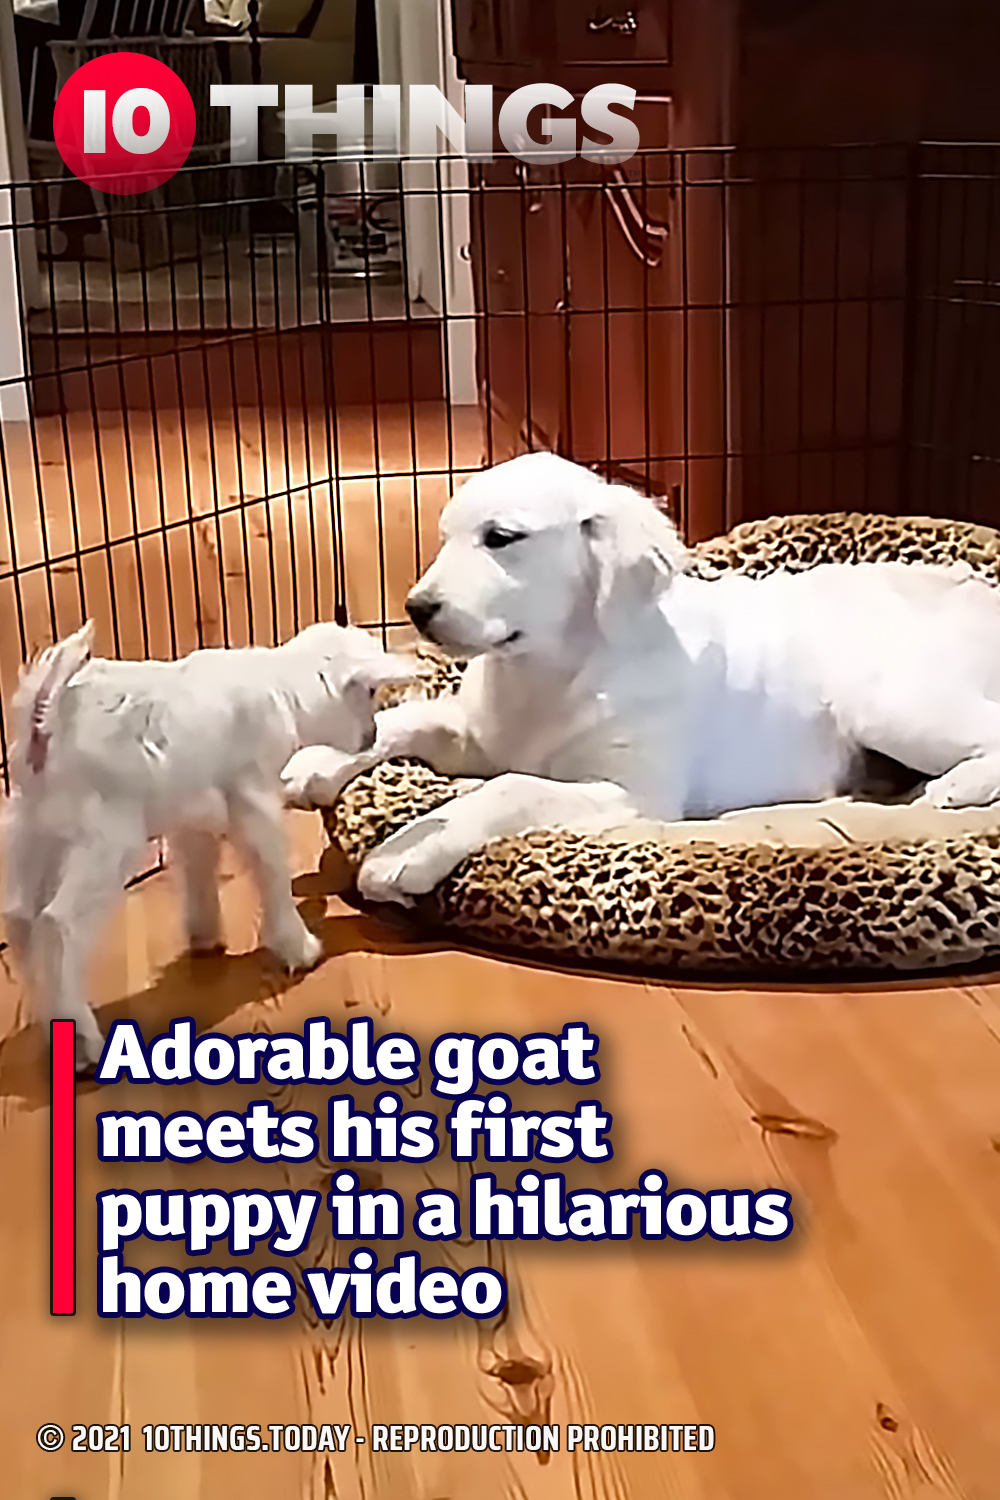 Adorable goat meets his first puppy in a hilarious home video